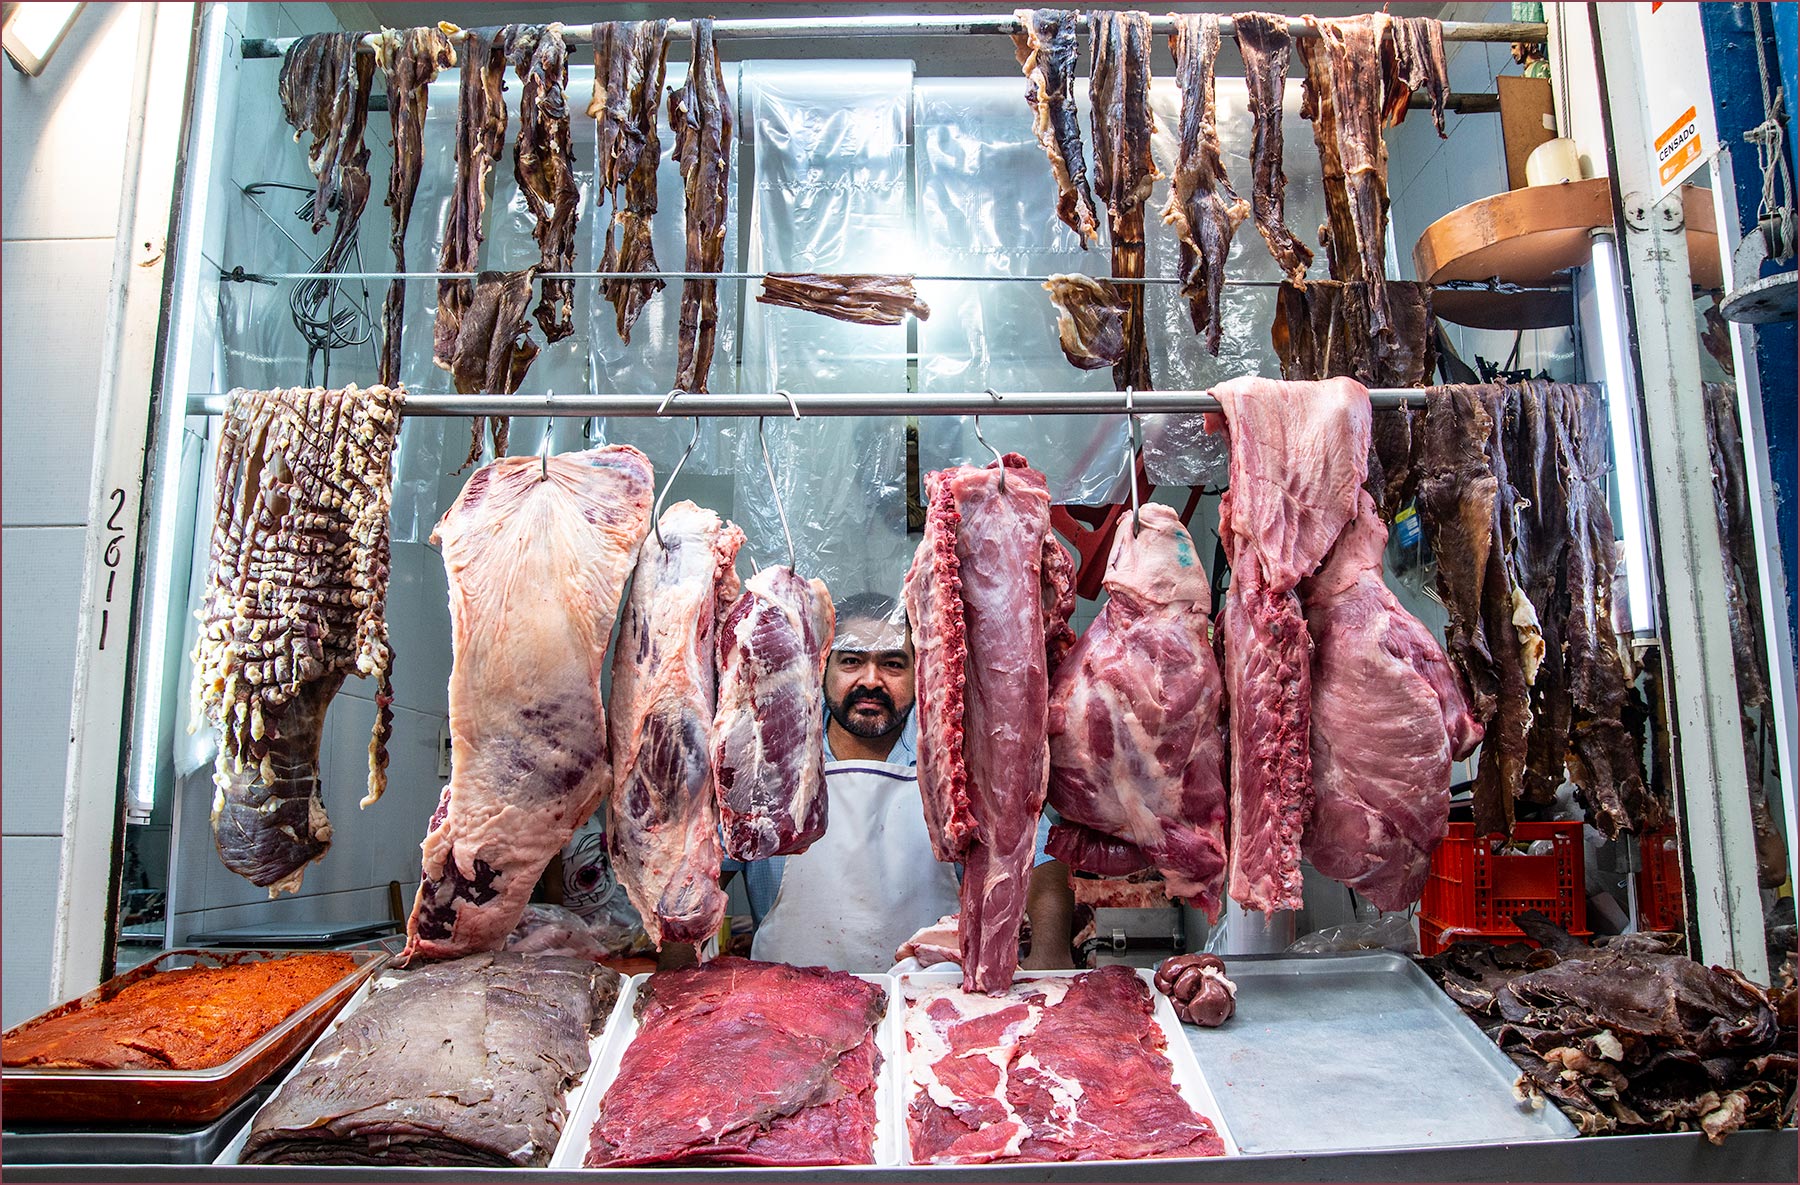 Oaxaca Mexico: Butcher from the Meat Market